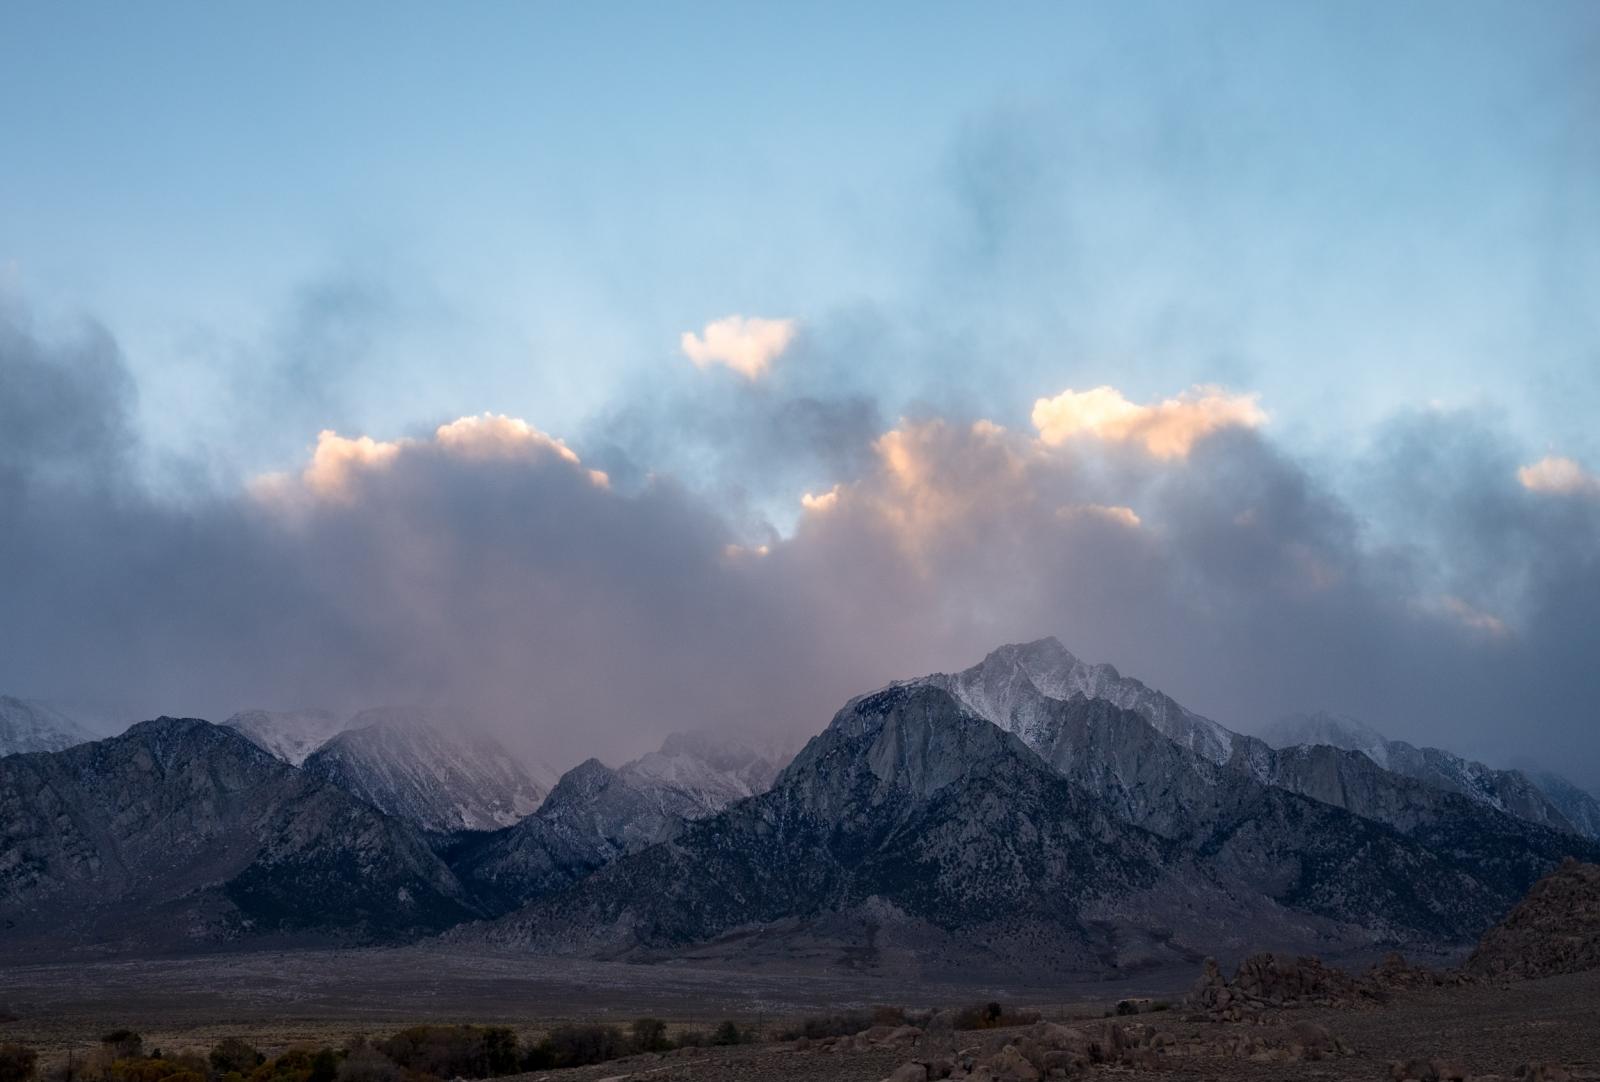 2. Mt, Whitney as a snow storm is crossing.